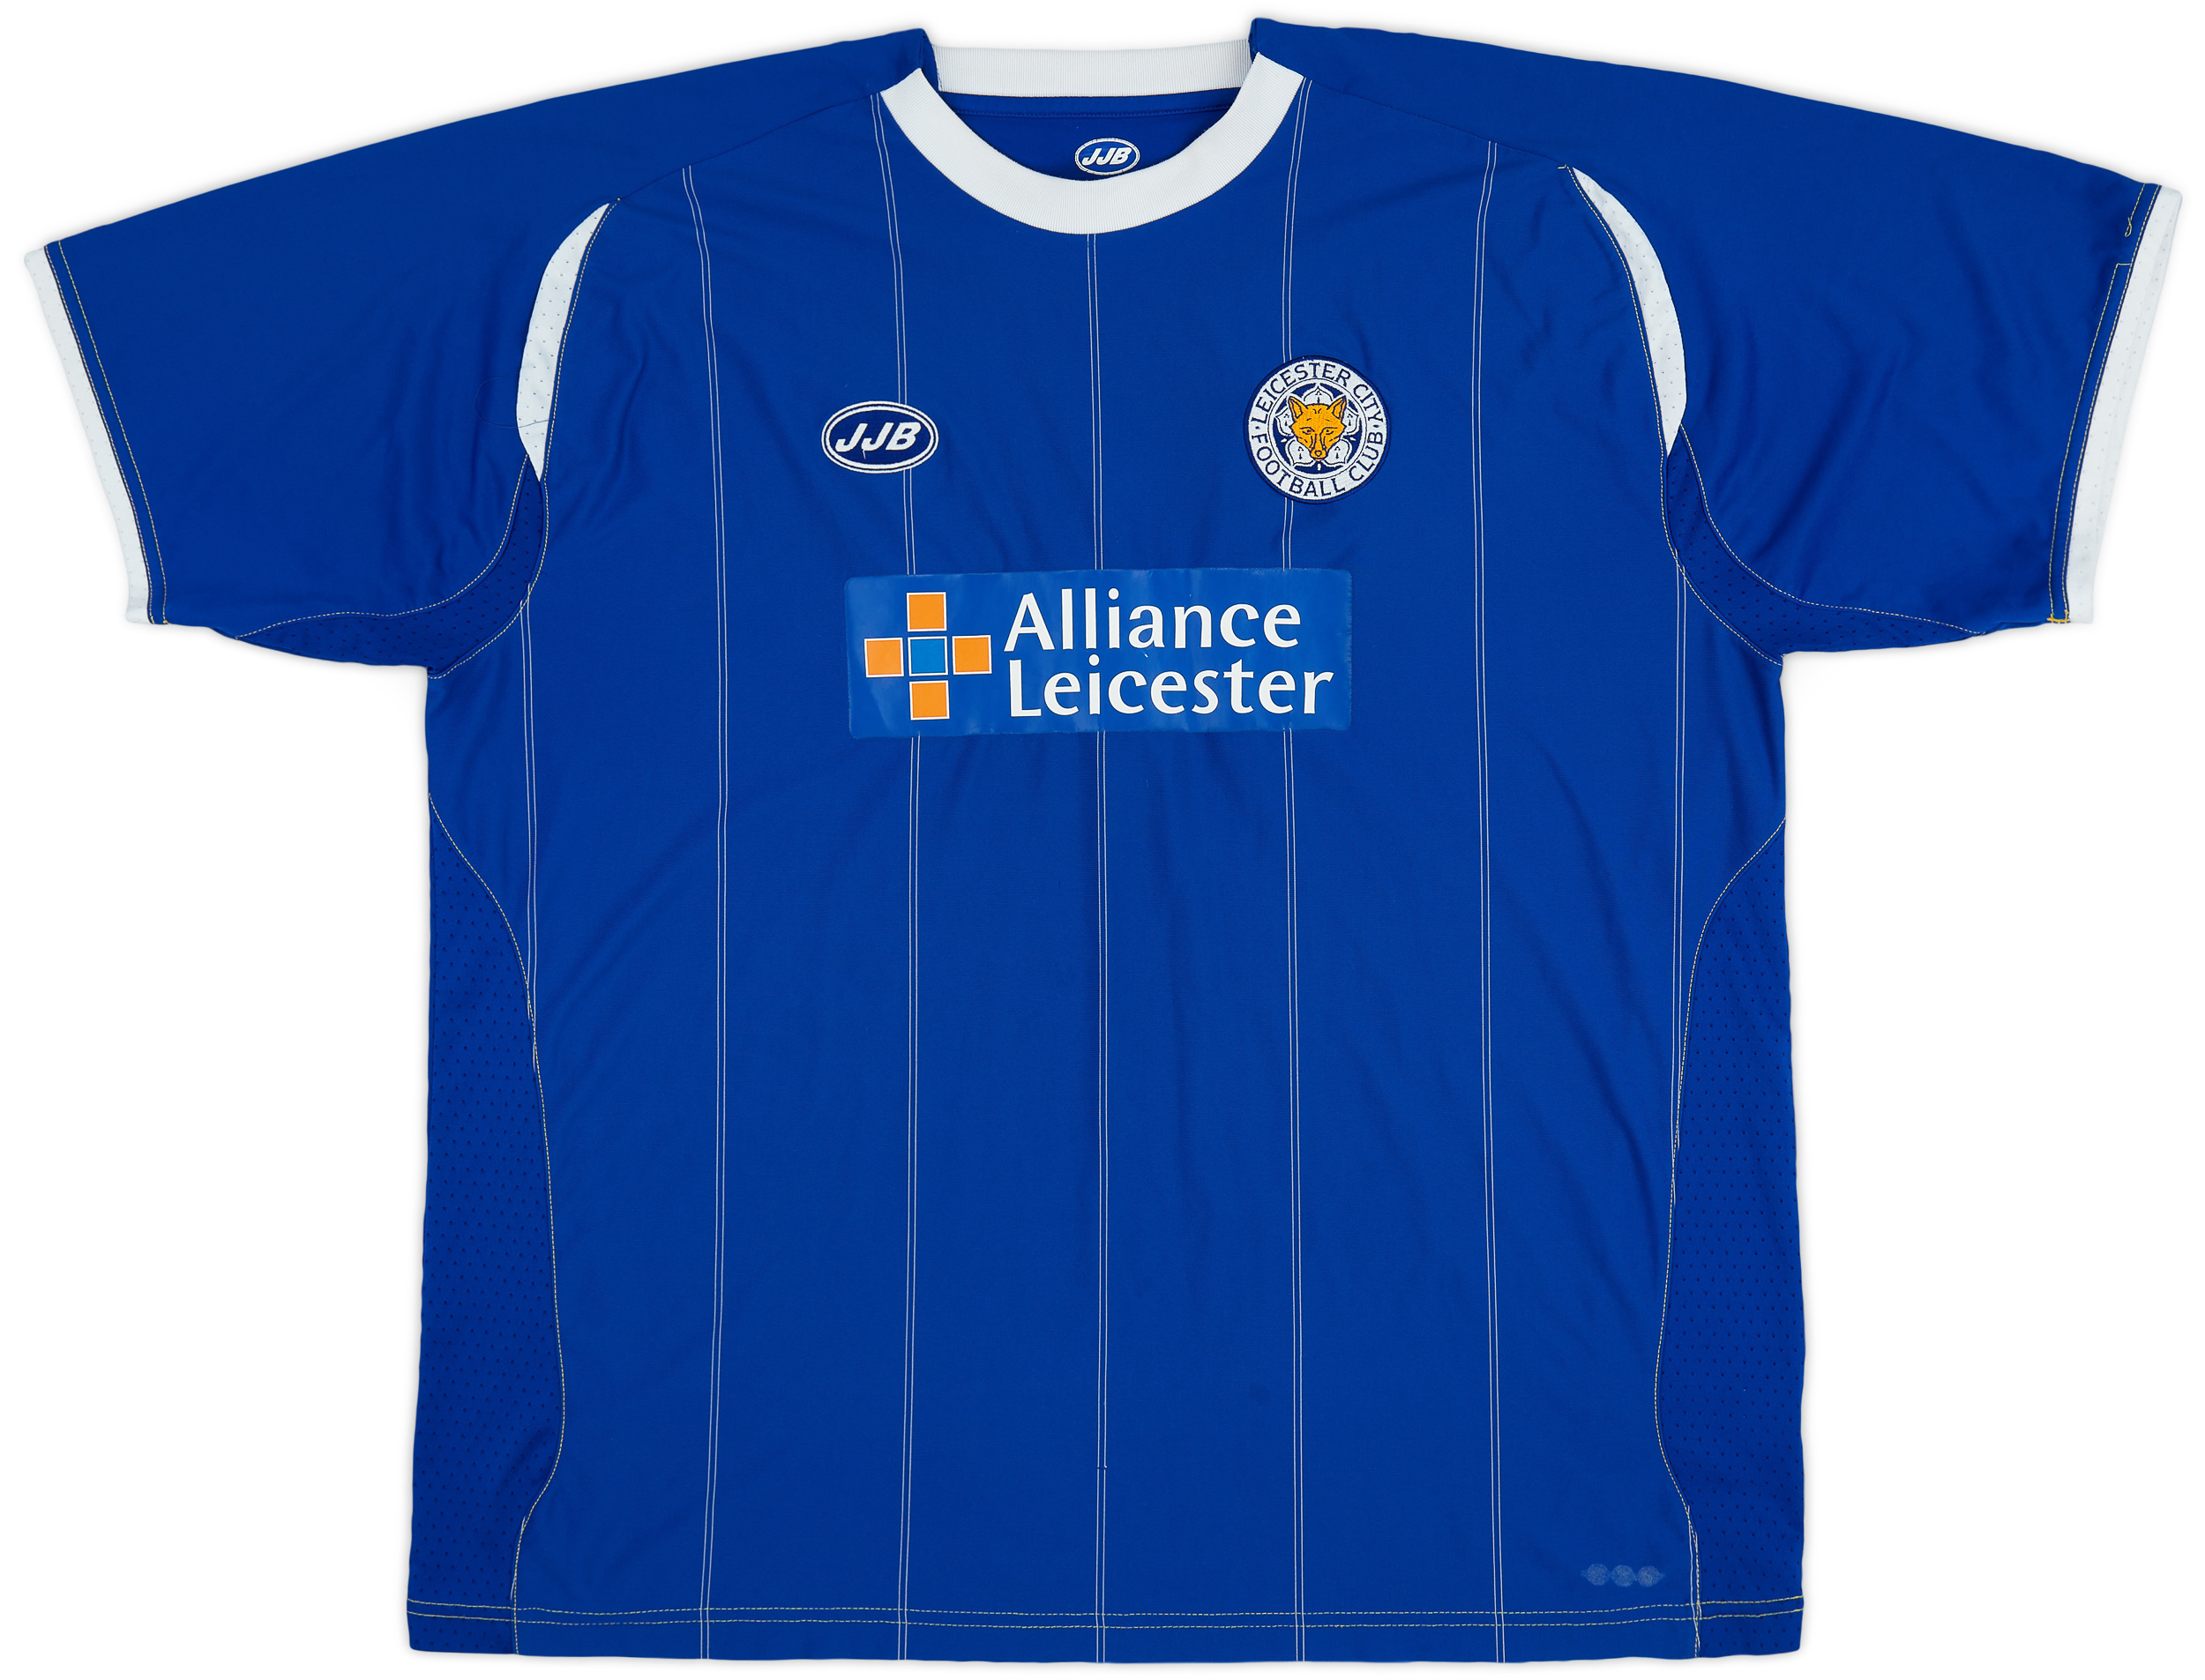 2006-07 Leicester Home Shirt - 6/10 - ()